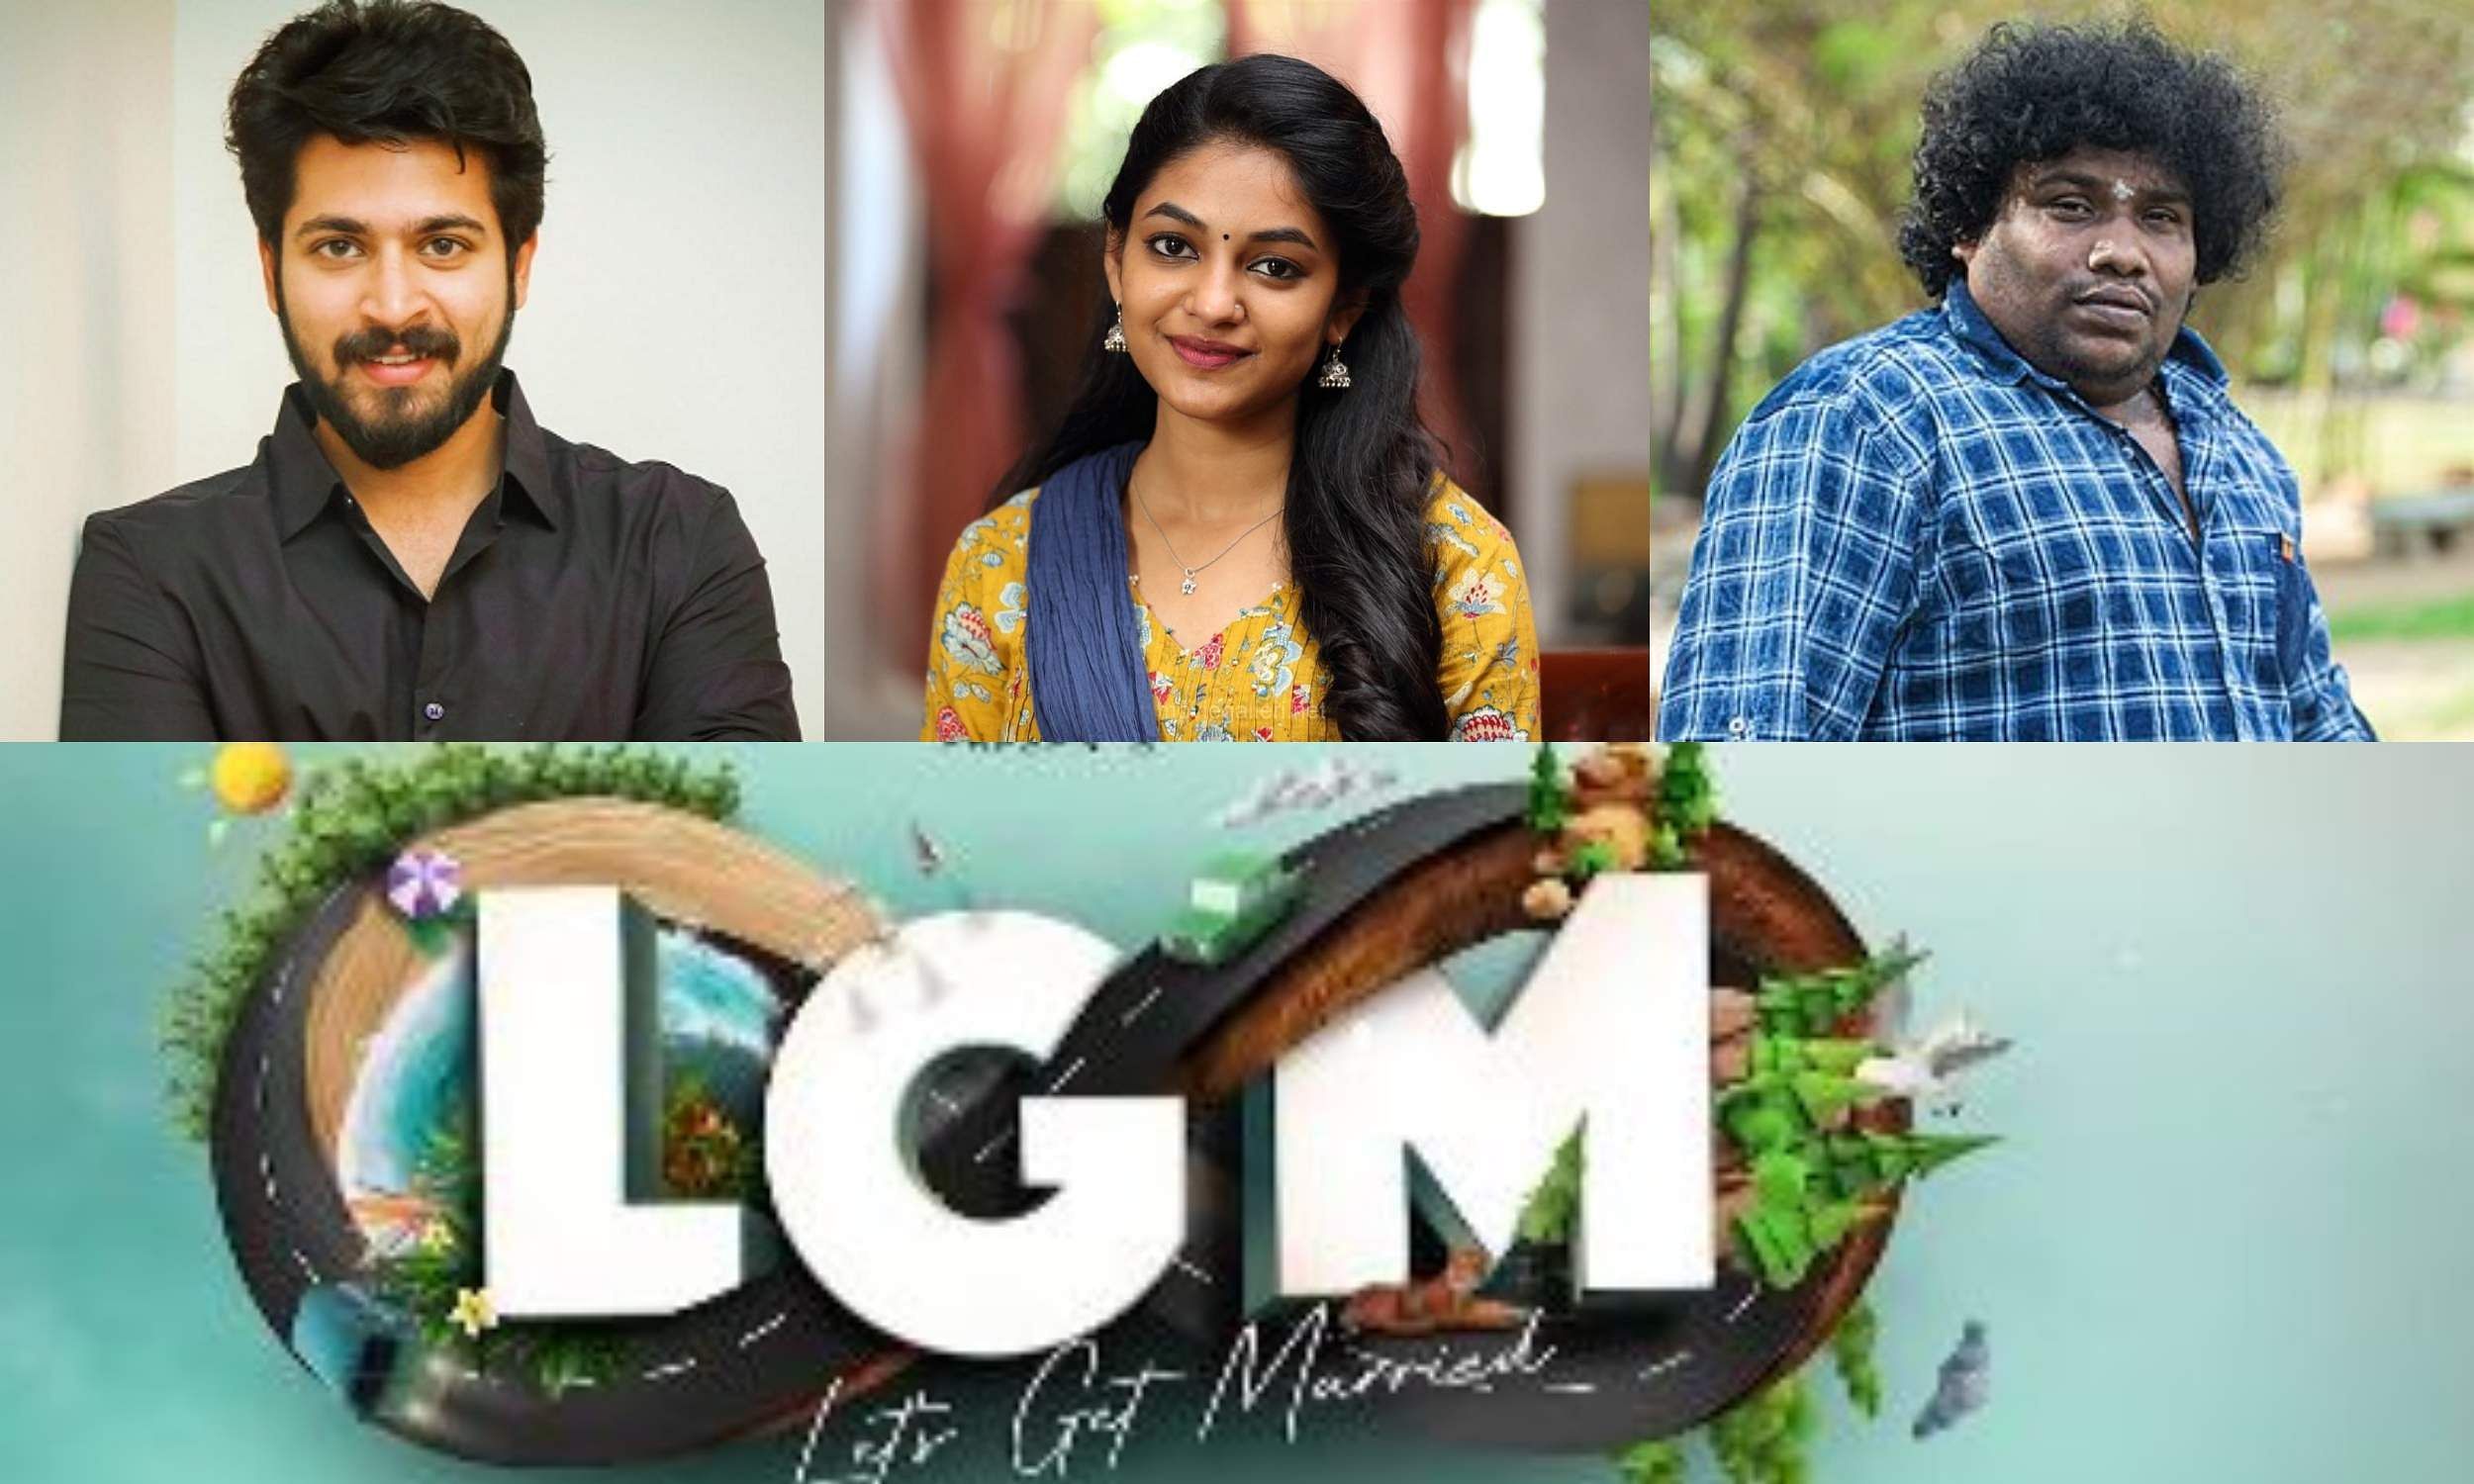 Dhoni Entertainment's Tamil film starring titled Let's Get Married